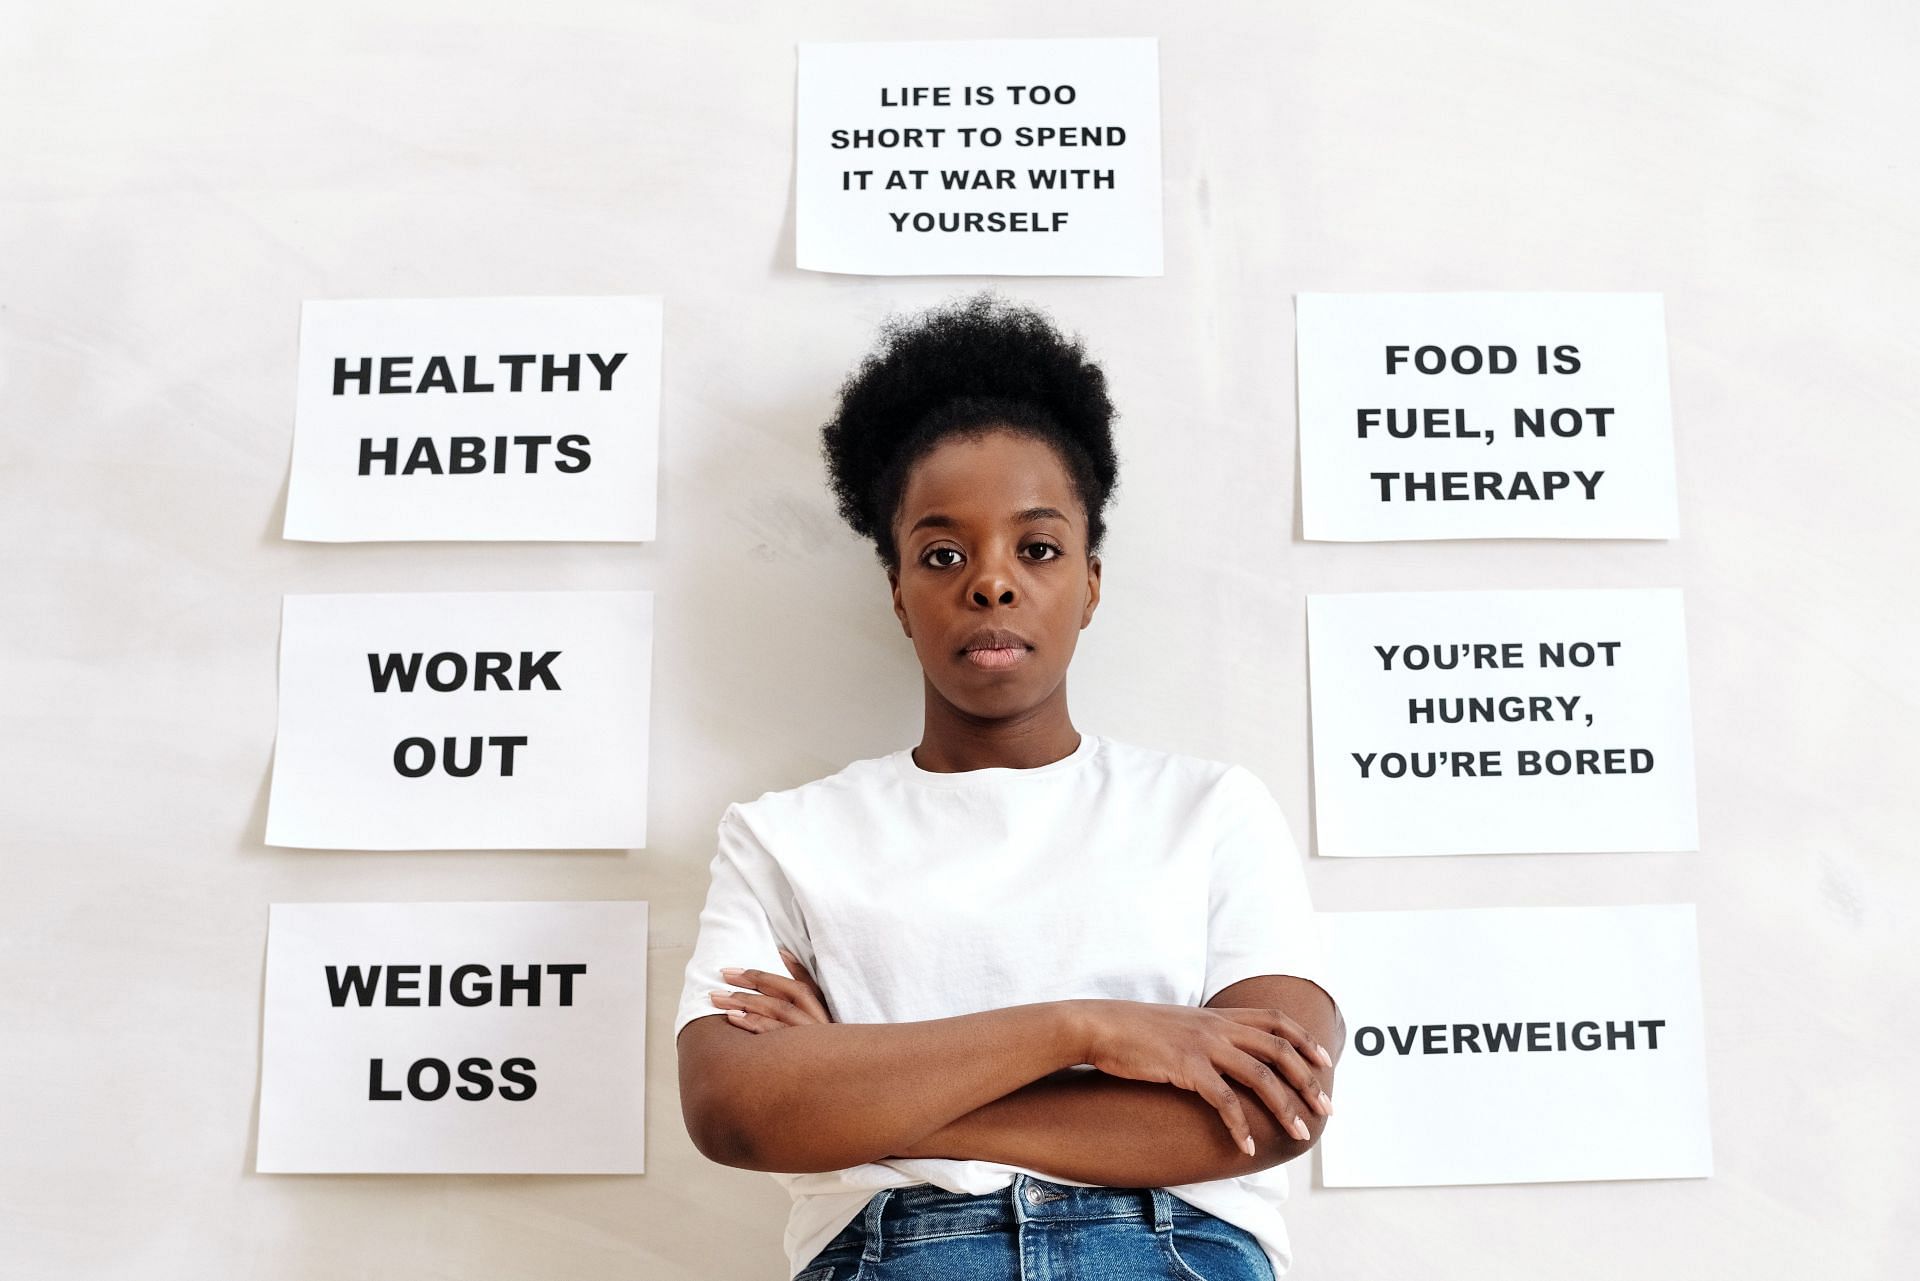 Habits can determine both our physical and mental health. (Image via Pexels/ Moe Magners)